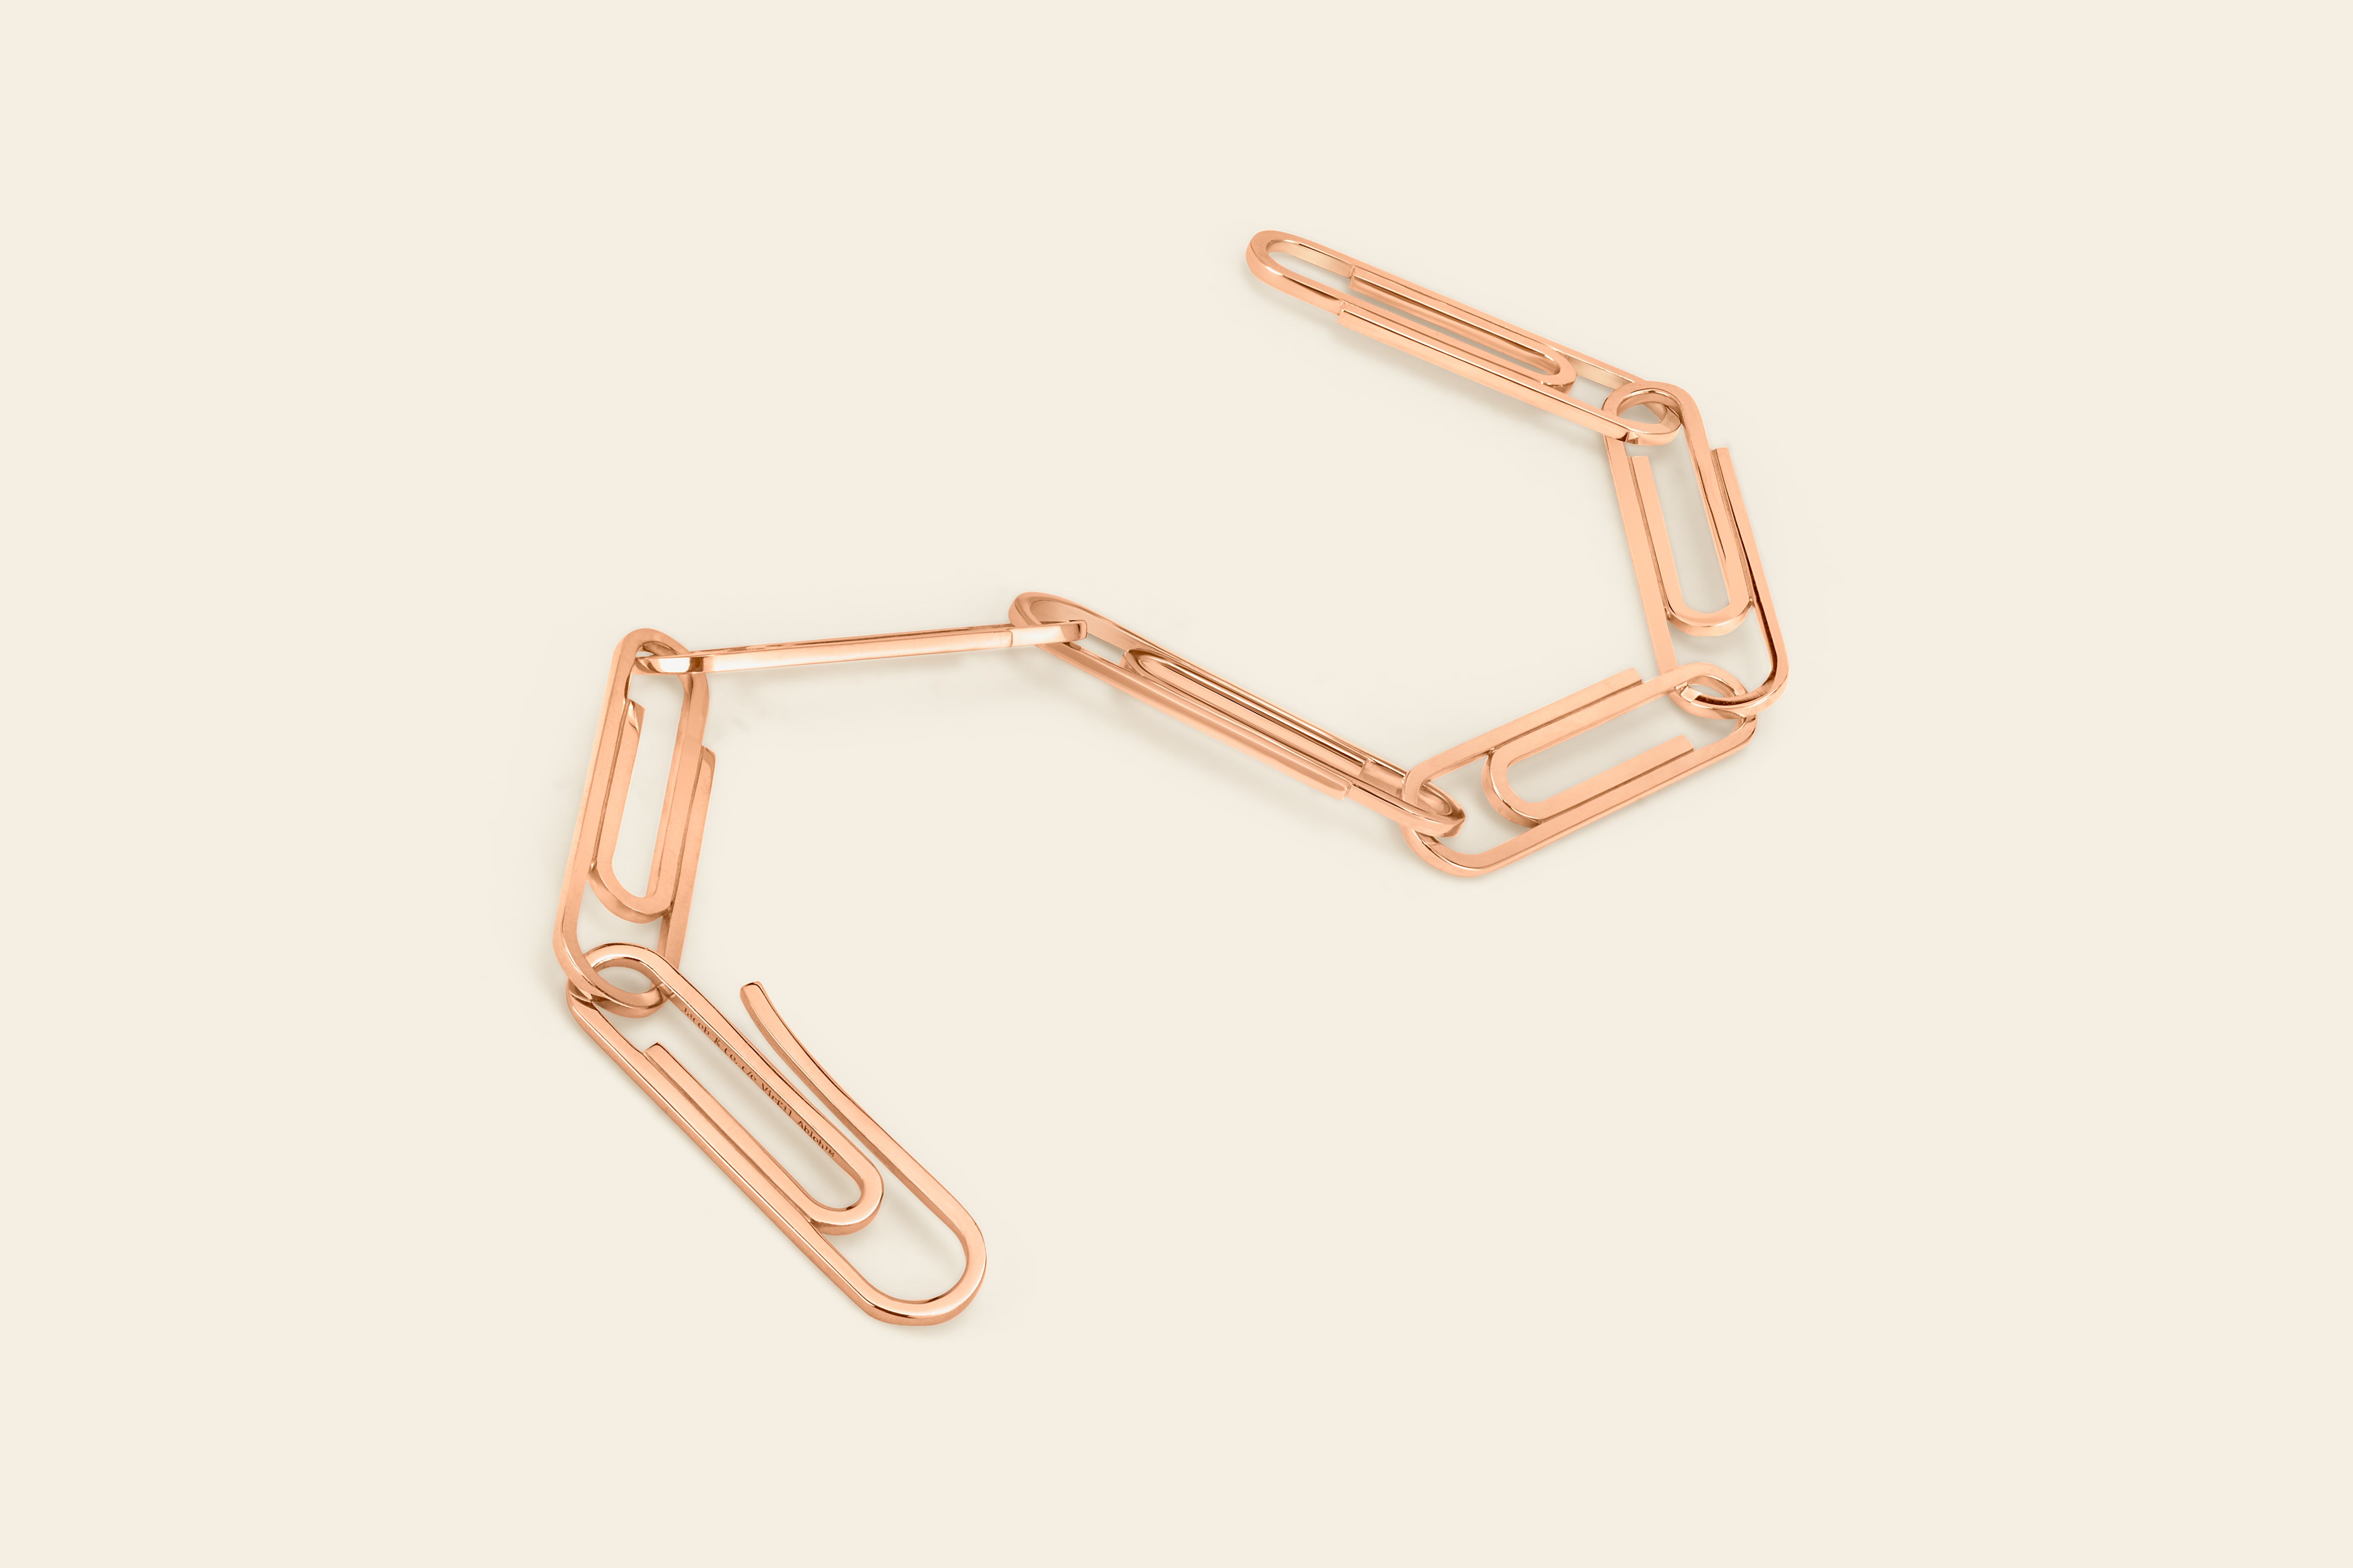 The Office Supplies jewelry by Virgil Abloh and Jacob & Co.